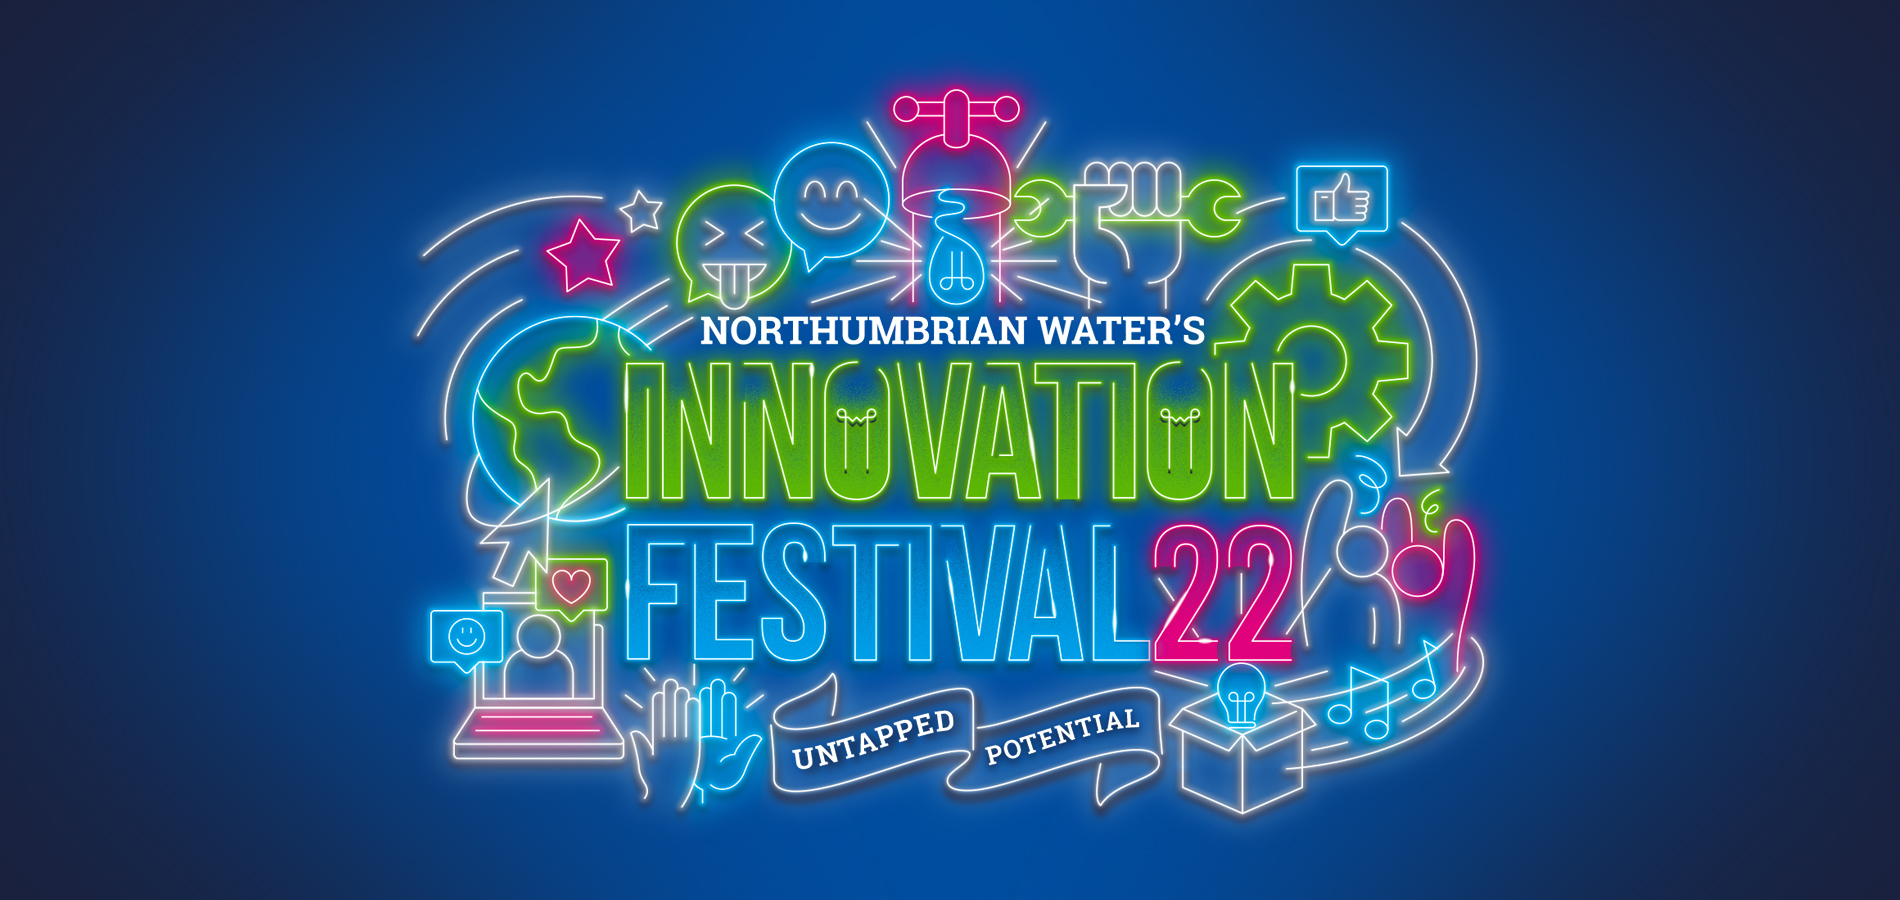 The Innovation Festival 2022 is coming very soon, and registration is NOW OPEN!